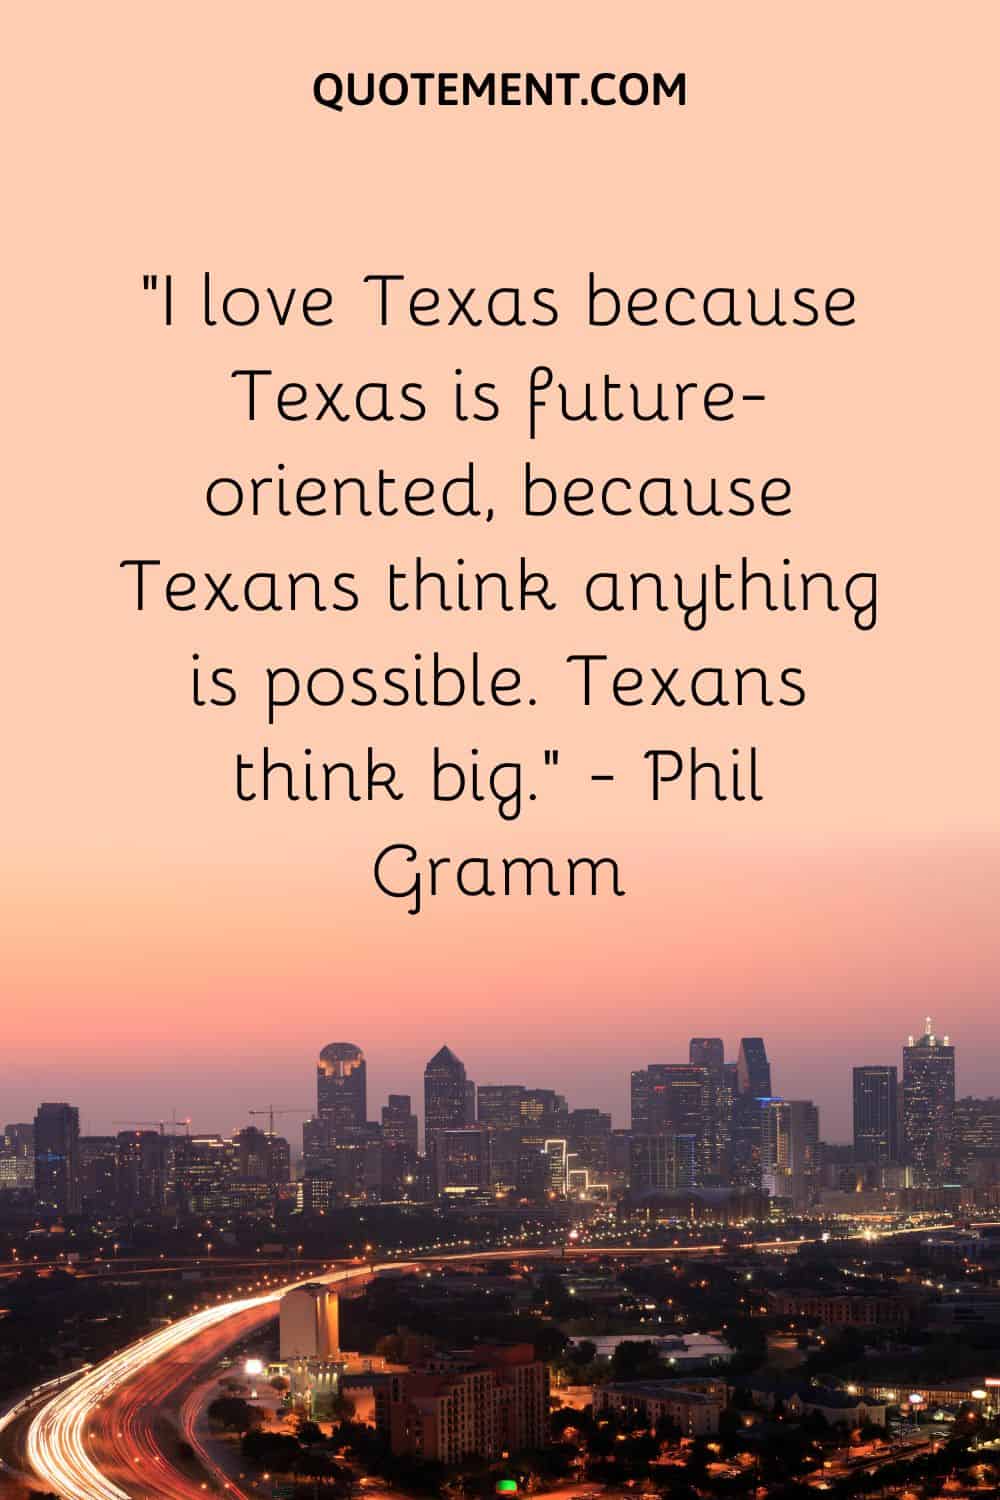 I love Texas because Texas is future-oriented, because Texans think anything is possible. Texans think big. – Phil Gramm